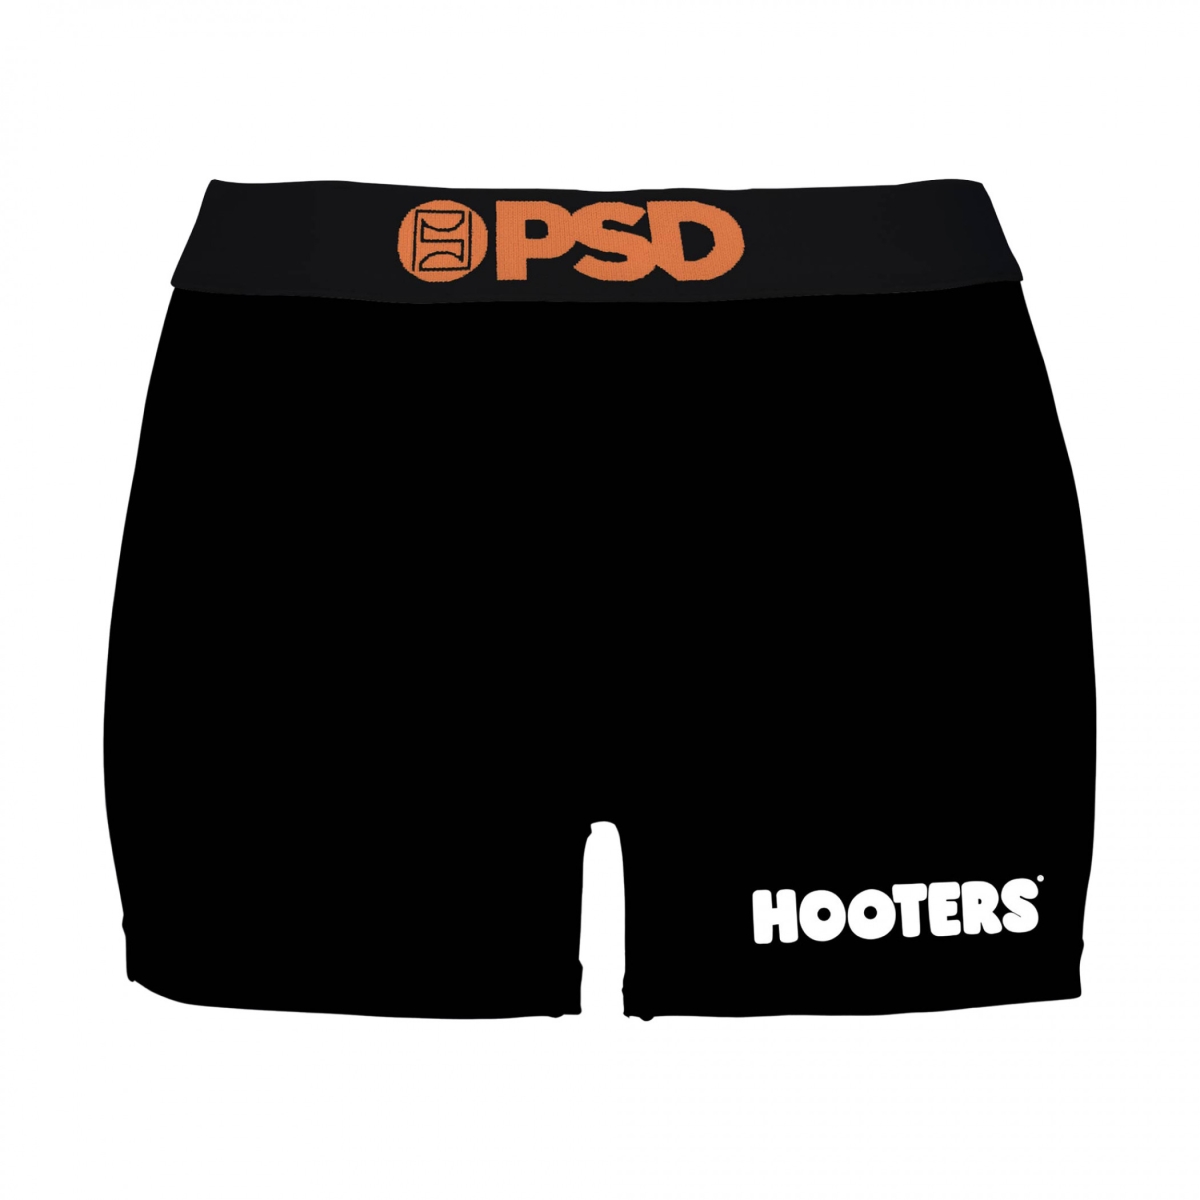 Picture of Hooters 844697-xsmall-24-26 Hooters Restaurant Uniform Black Microfiber Blend PSD Boy Shorts Underwear - Extra Small 24-26